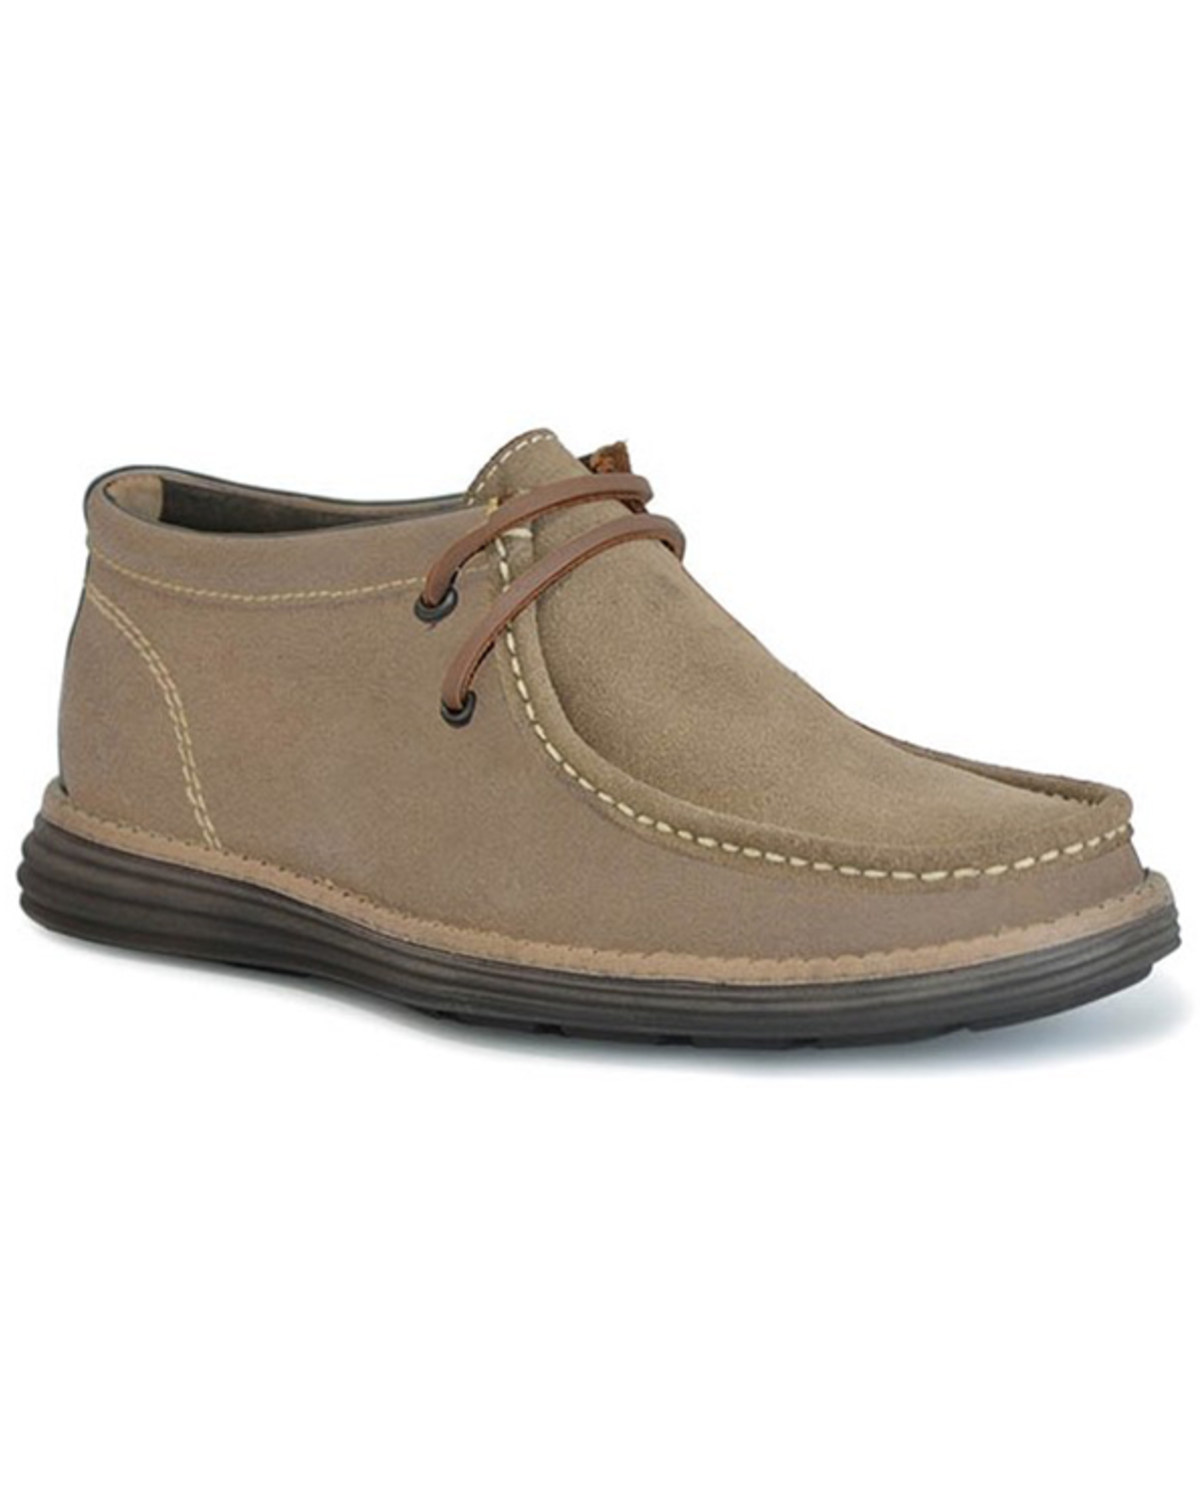 Stetson Men's Wyatt All-Over Suede Casual Lace-Up Chukka Shoes - Moc Toe